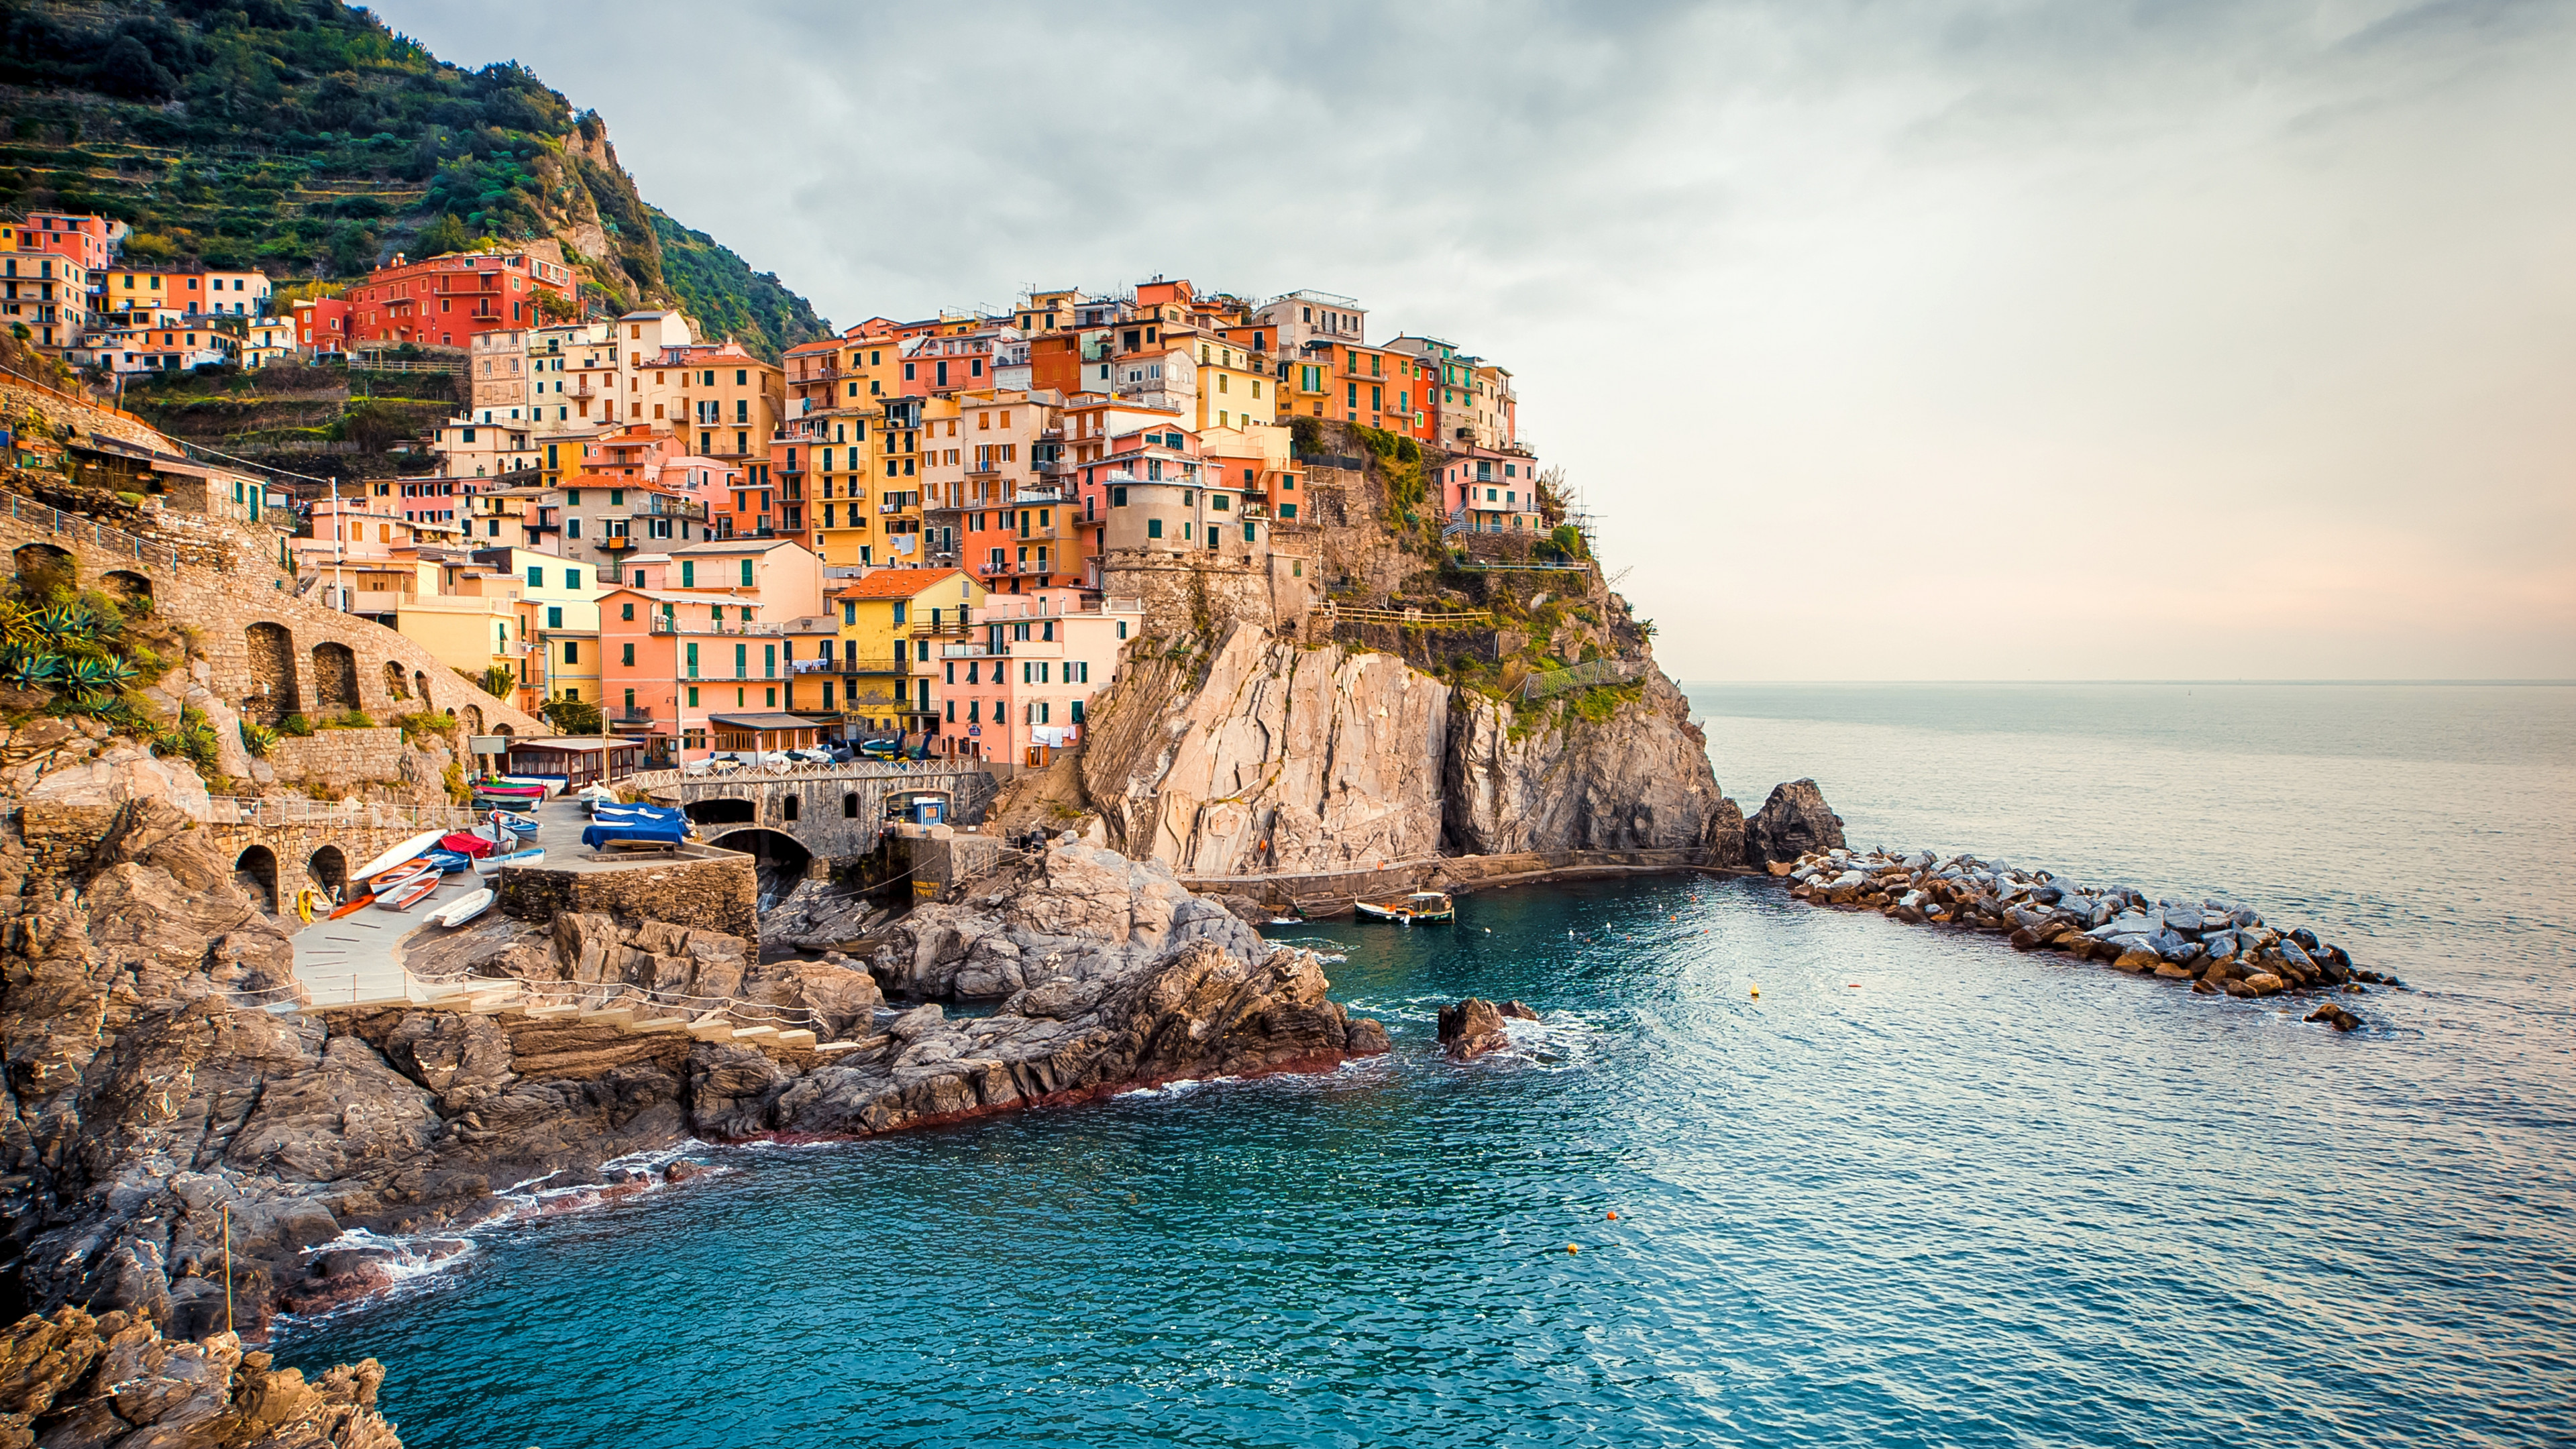 15 Little Towns in Italy Too Stunning to be Real